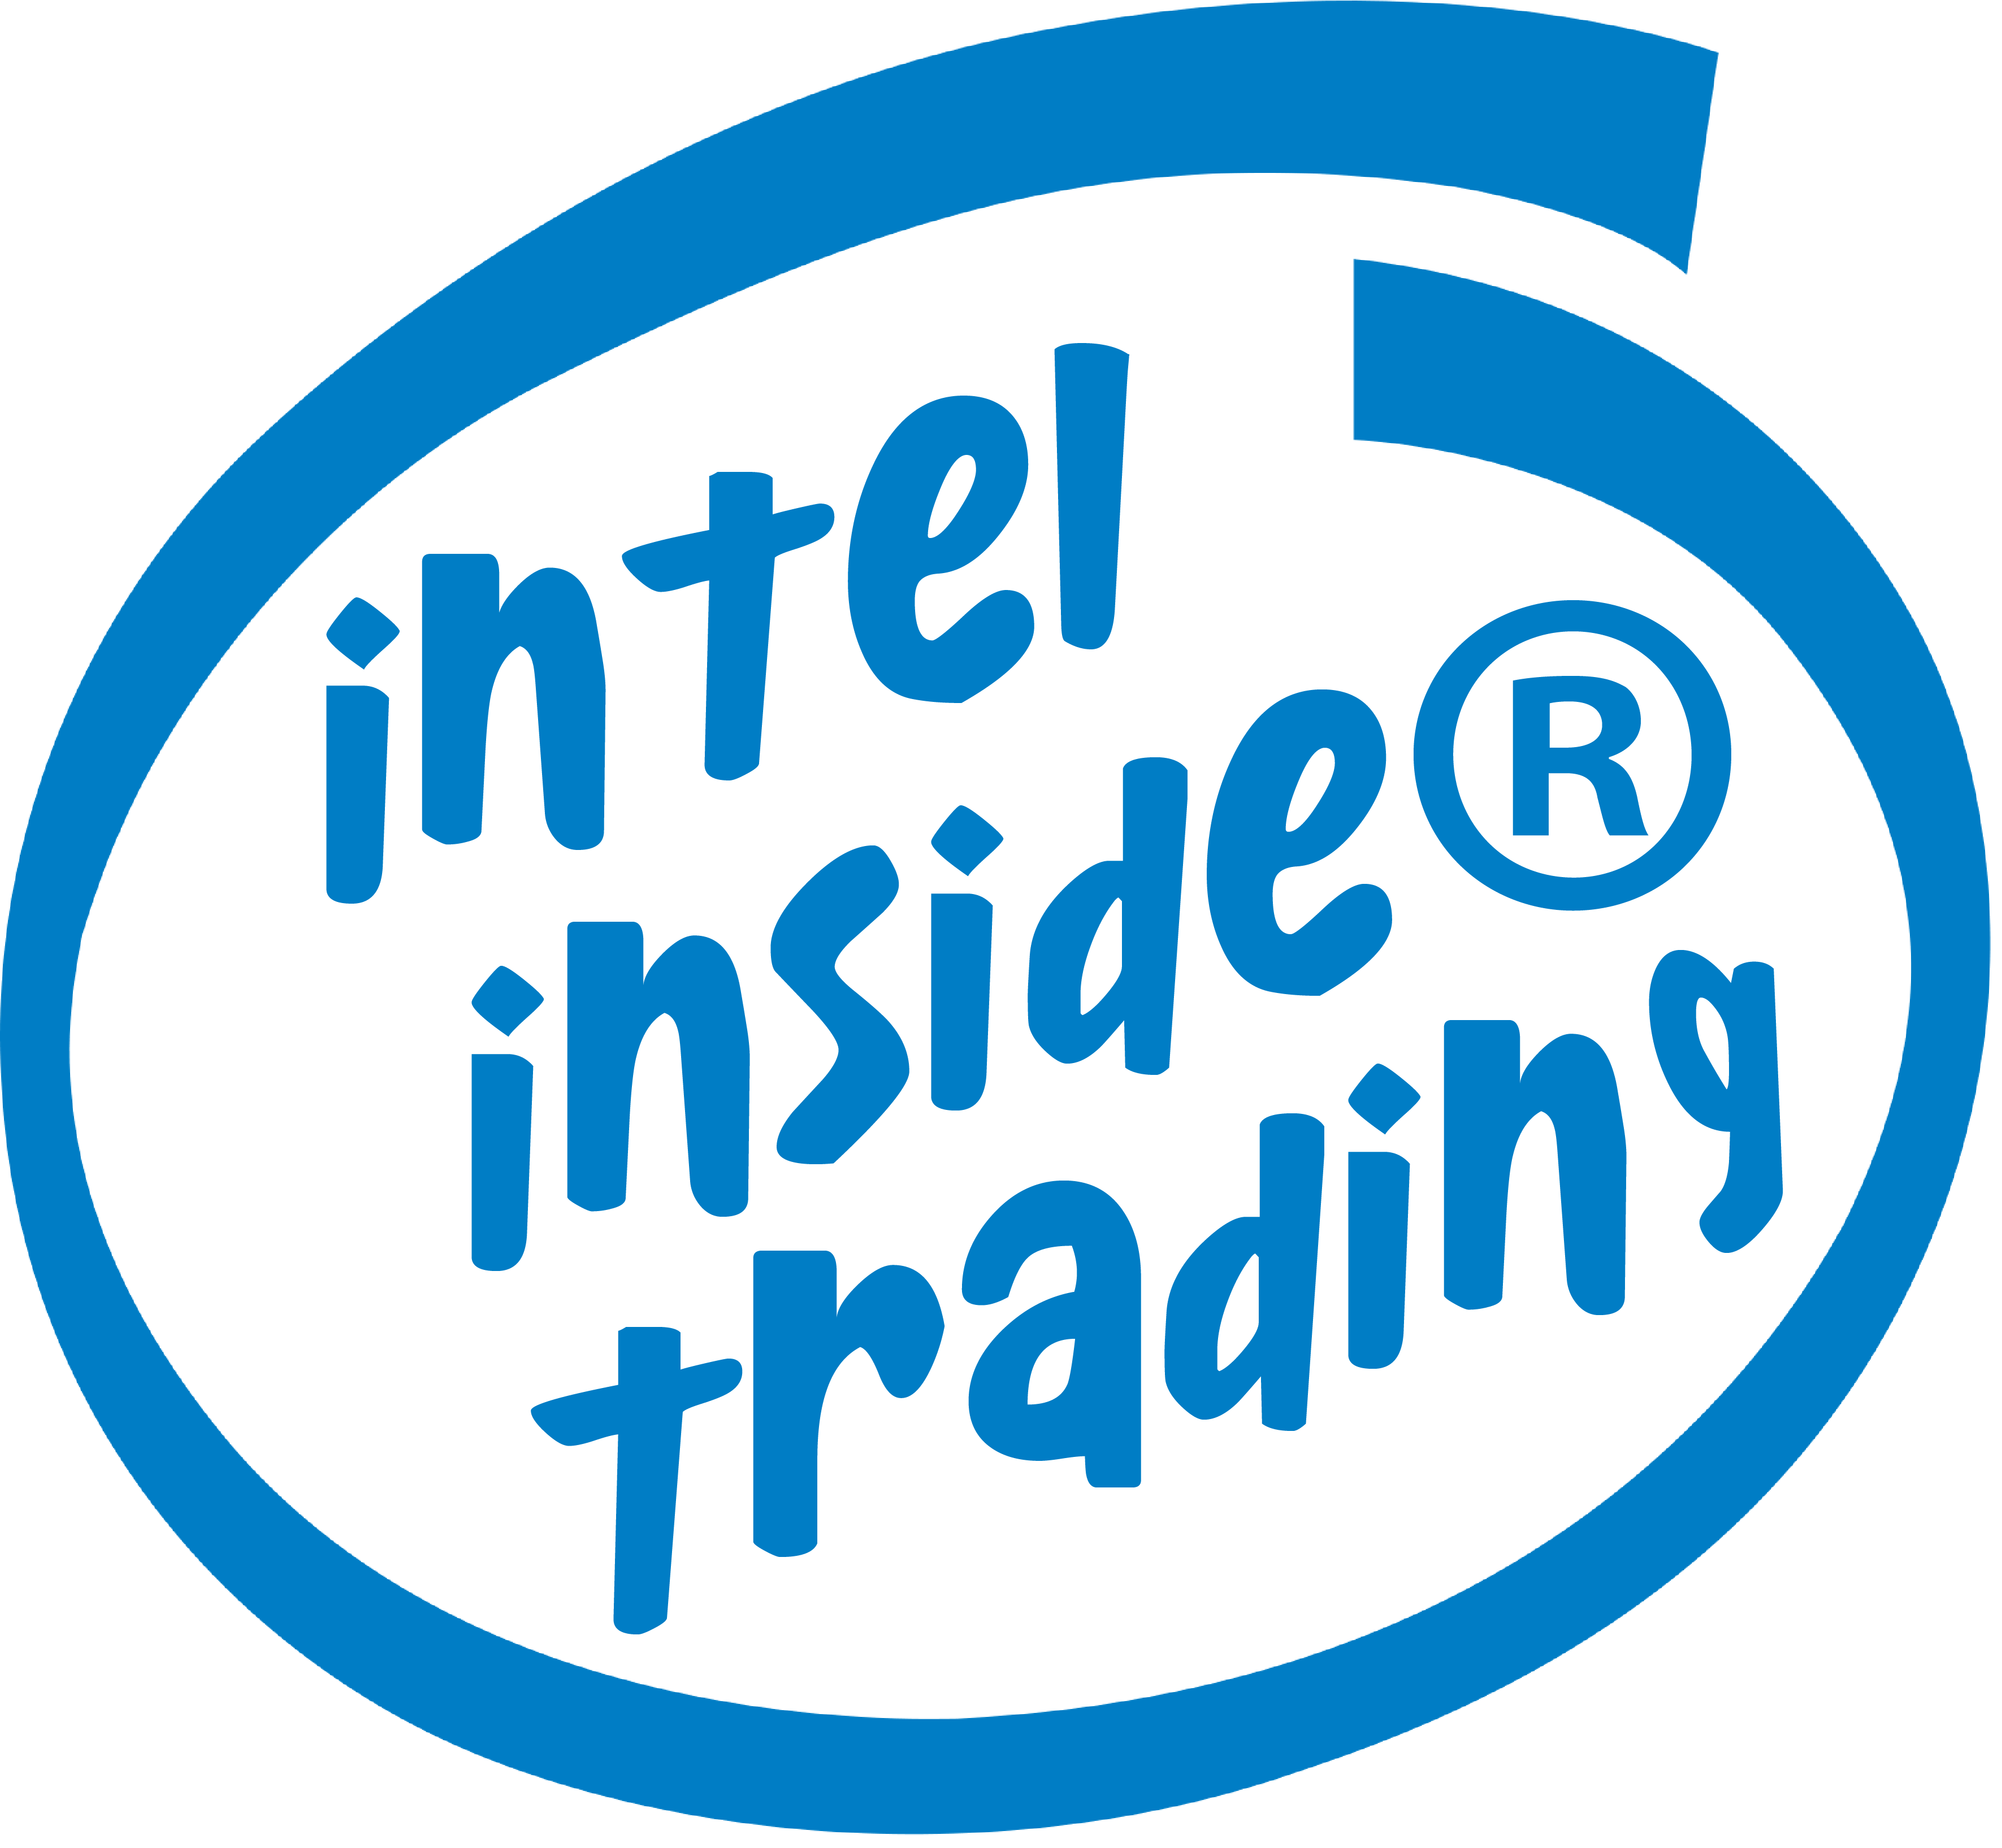 Intel CEO sold $24m of his shares before a serious design flaw was made public. This is their proposed new sticker